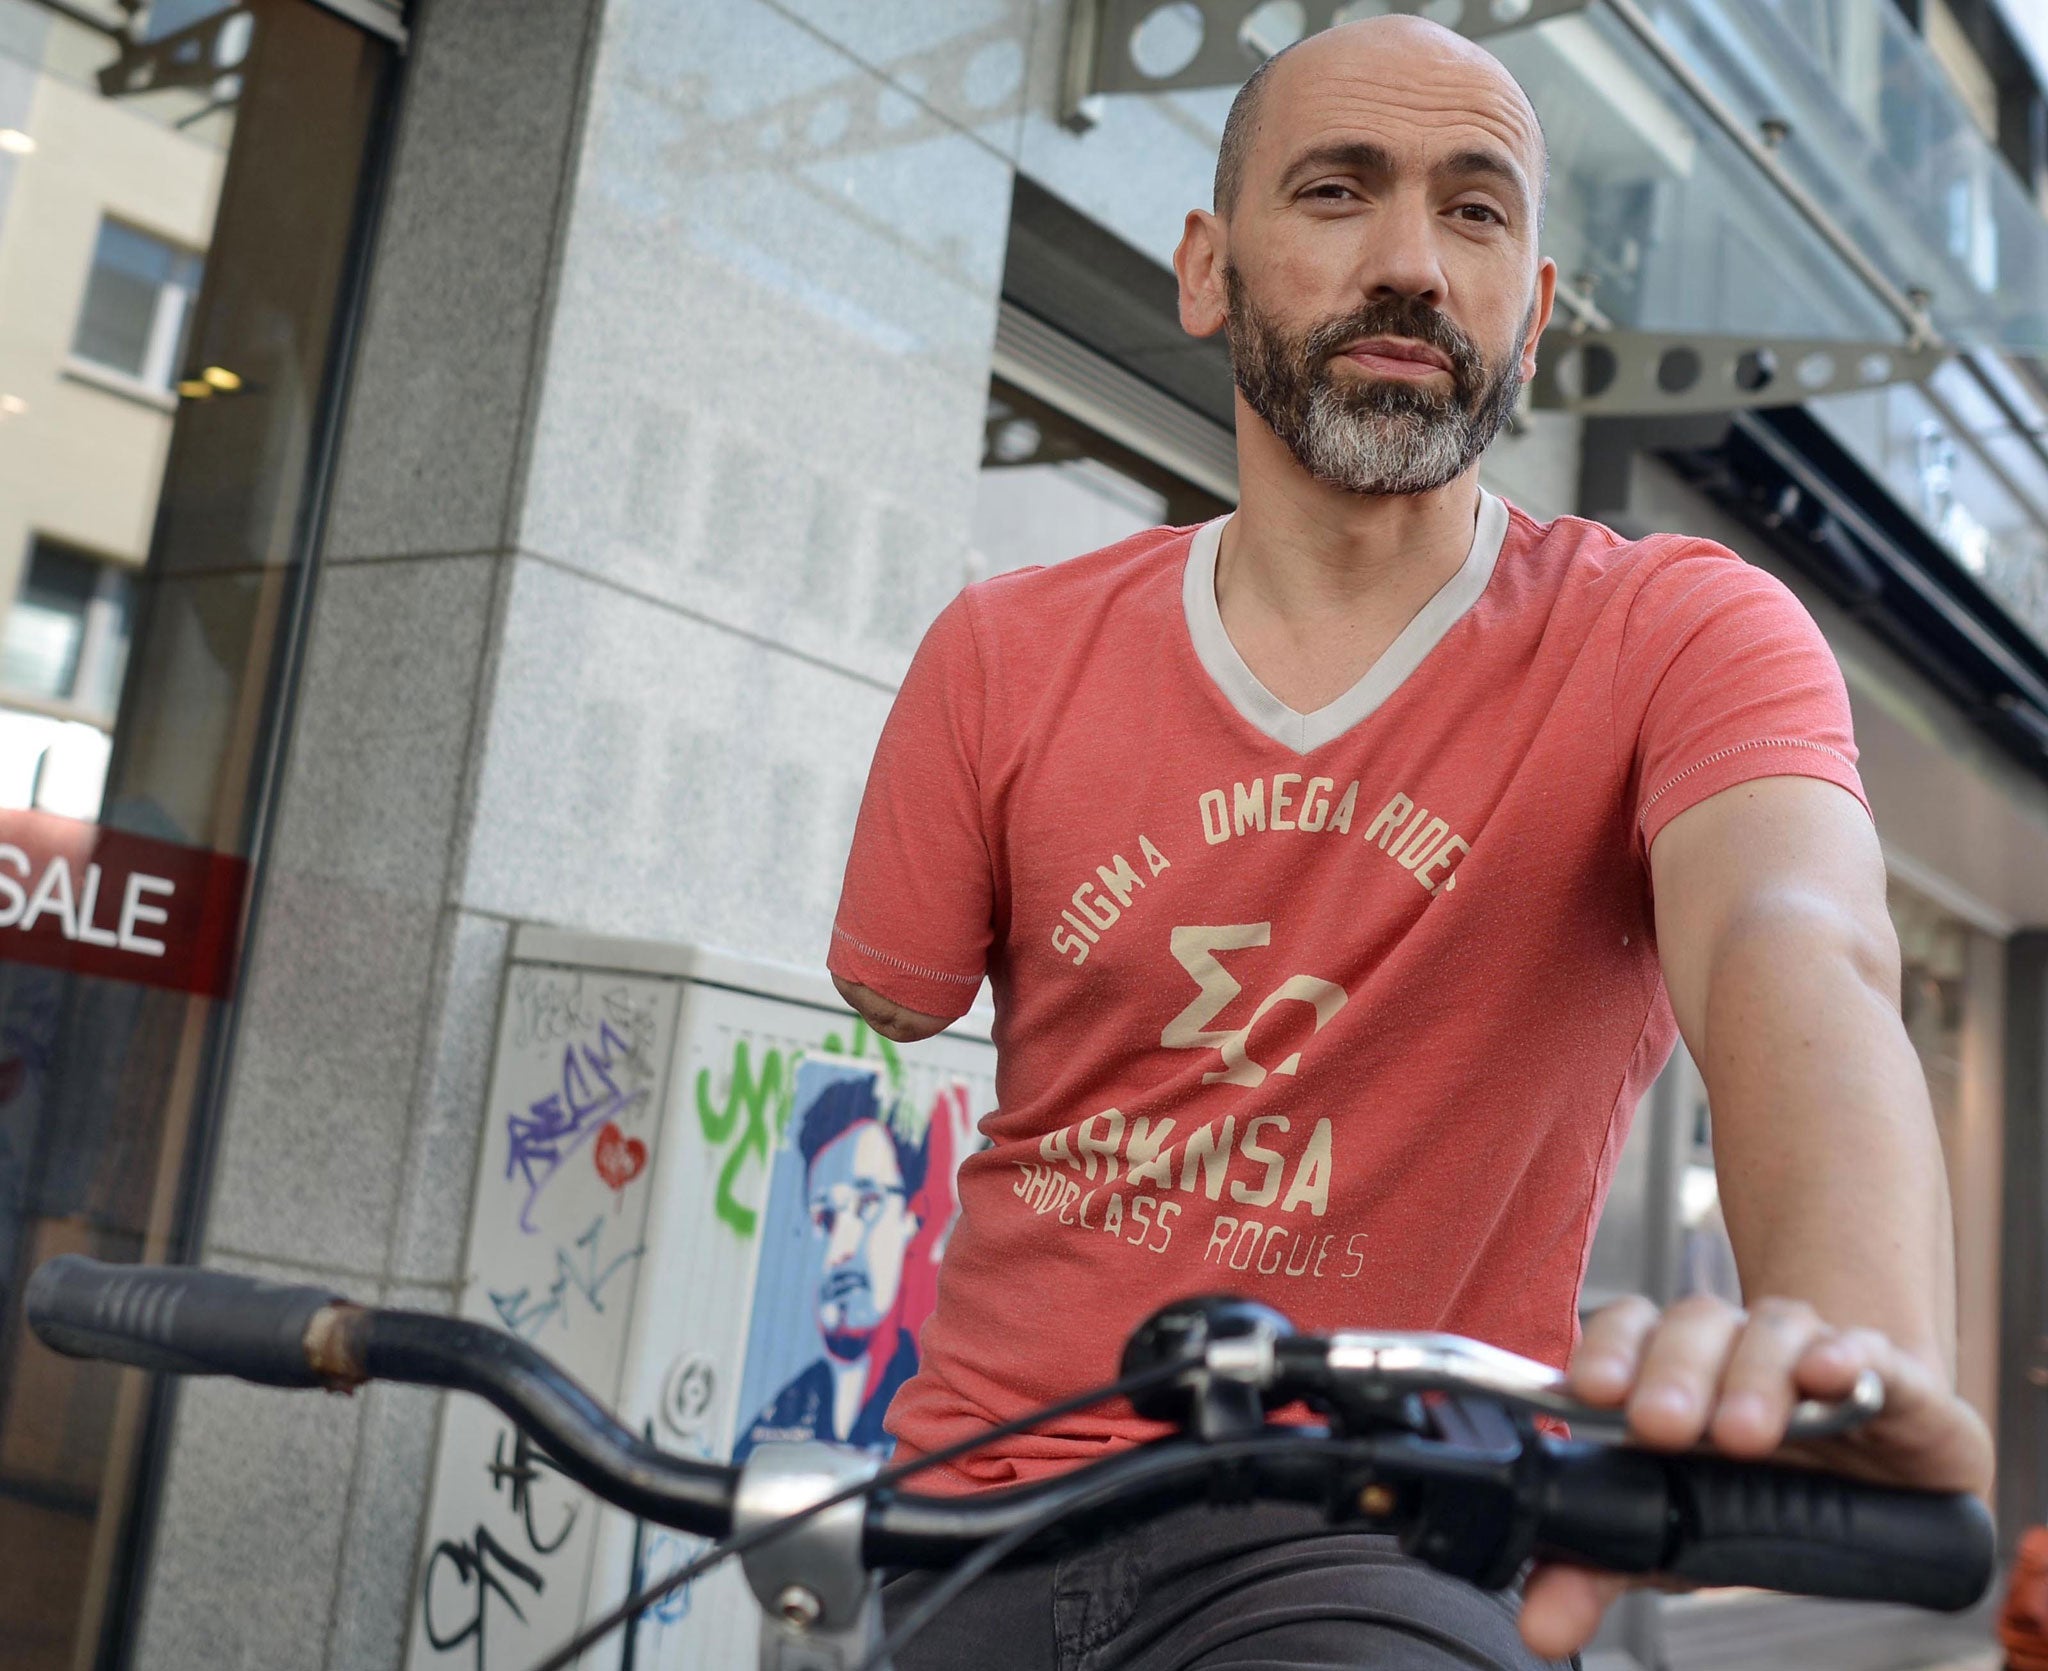 One-armed cyclist Bogdan Ionescu poses with his bike on July 1, 2014 in Cologne, western Germany